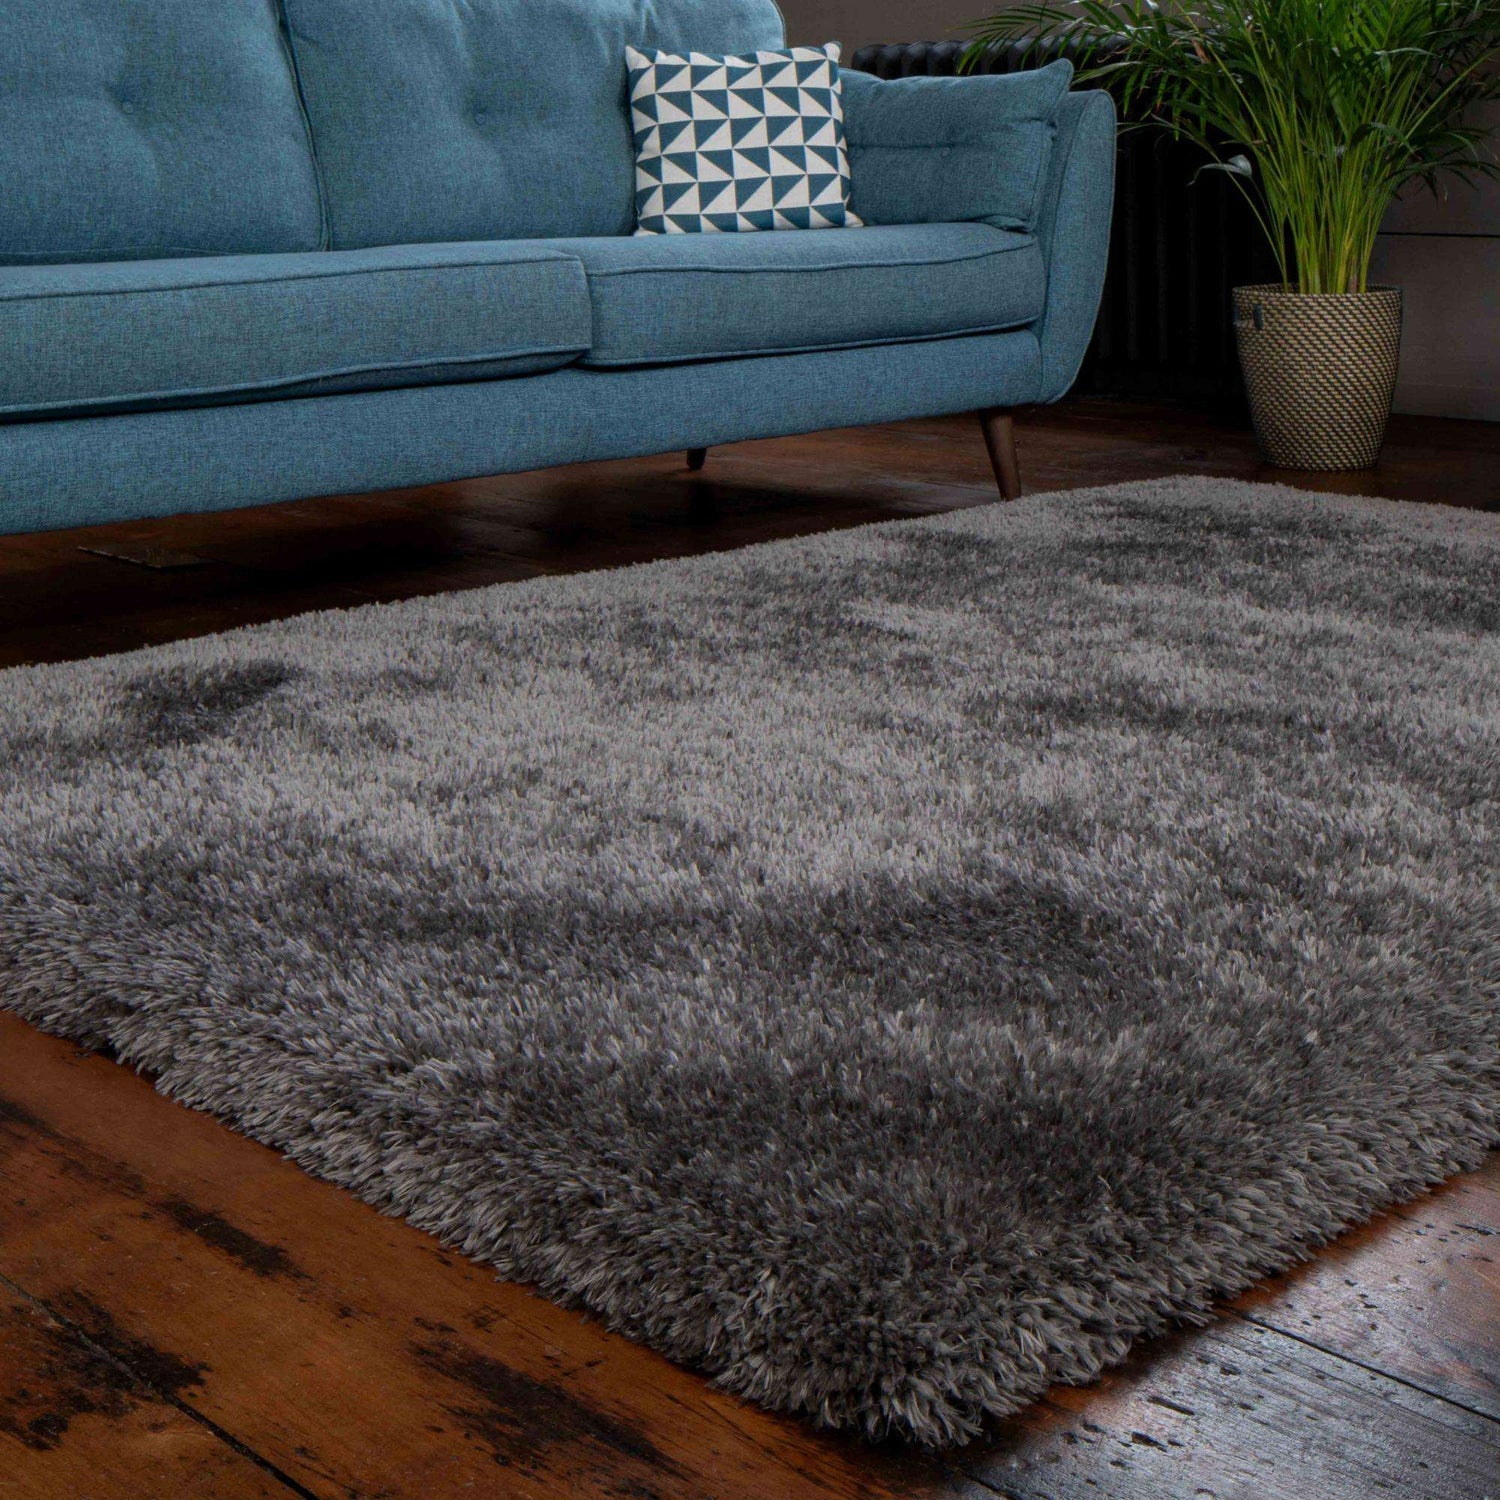 Deluxe Thick Soft Light Brown Shaggy Bedroom Rug